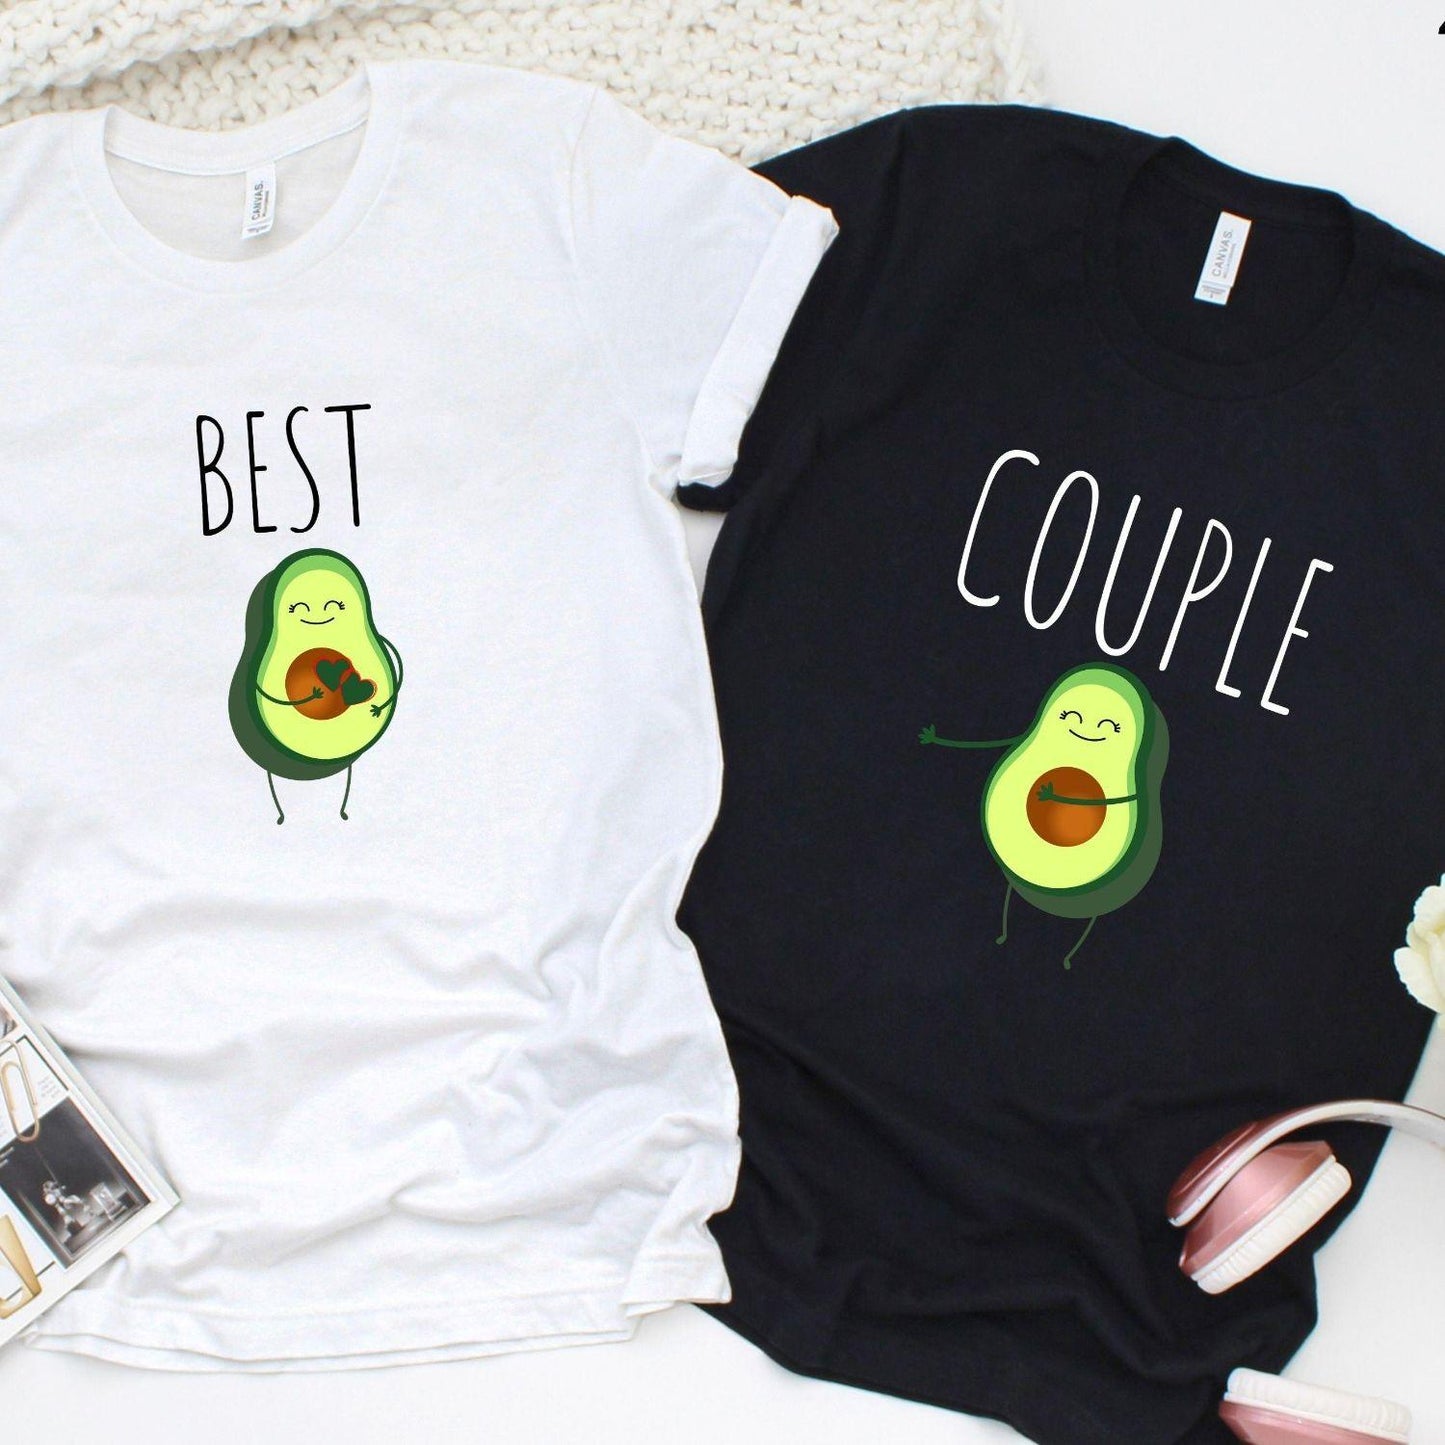 Best Couple Matching Set - Avocado Couple Apparel for Couples - 4Lovebirds